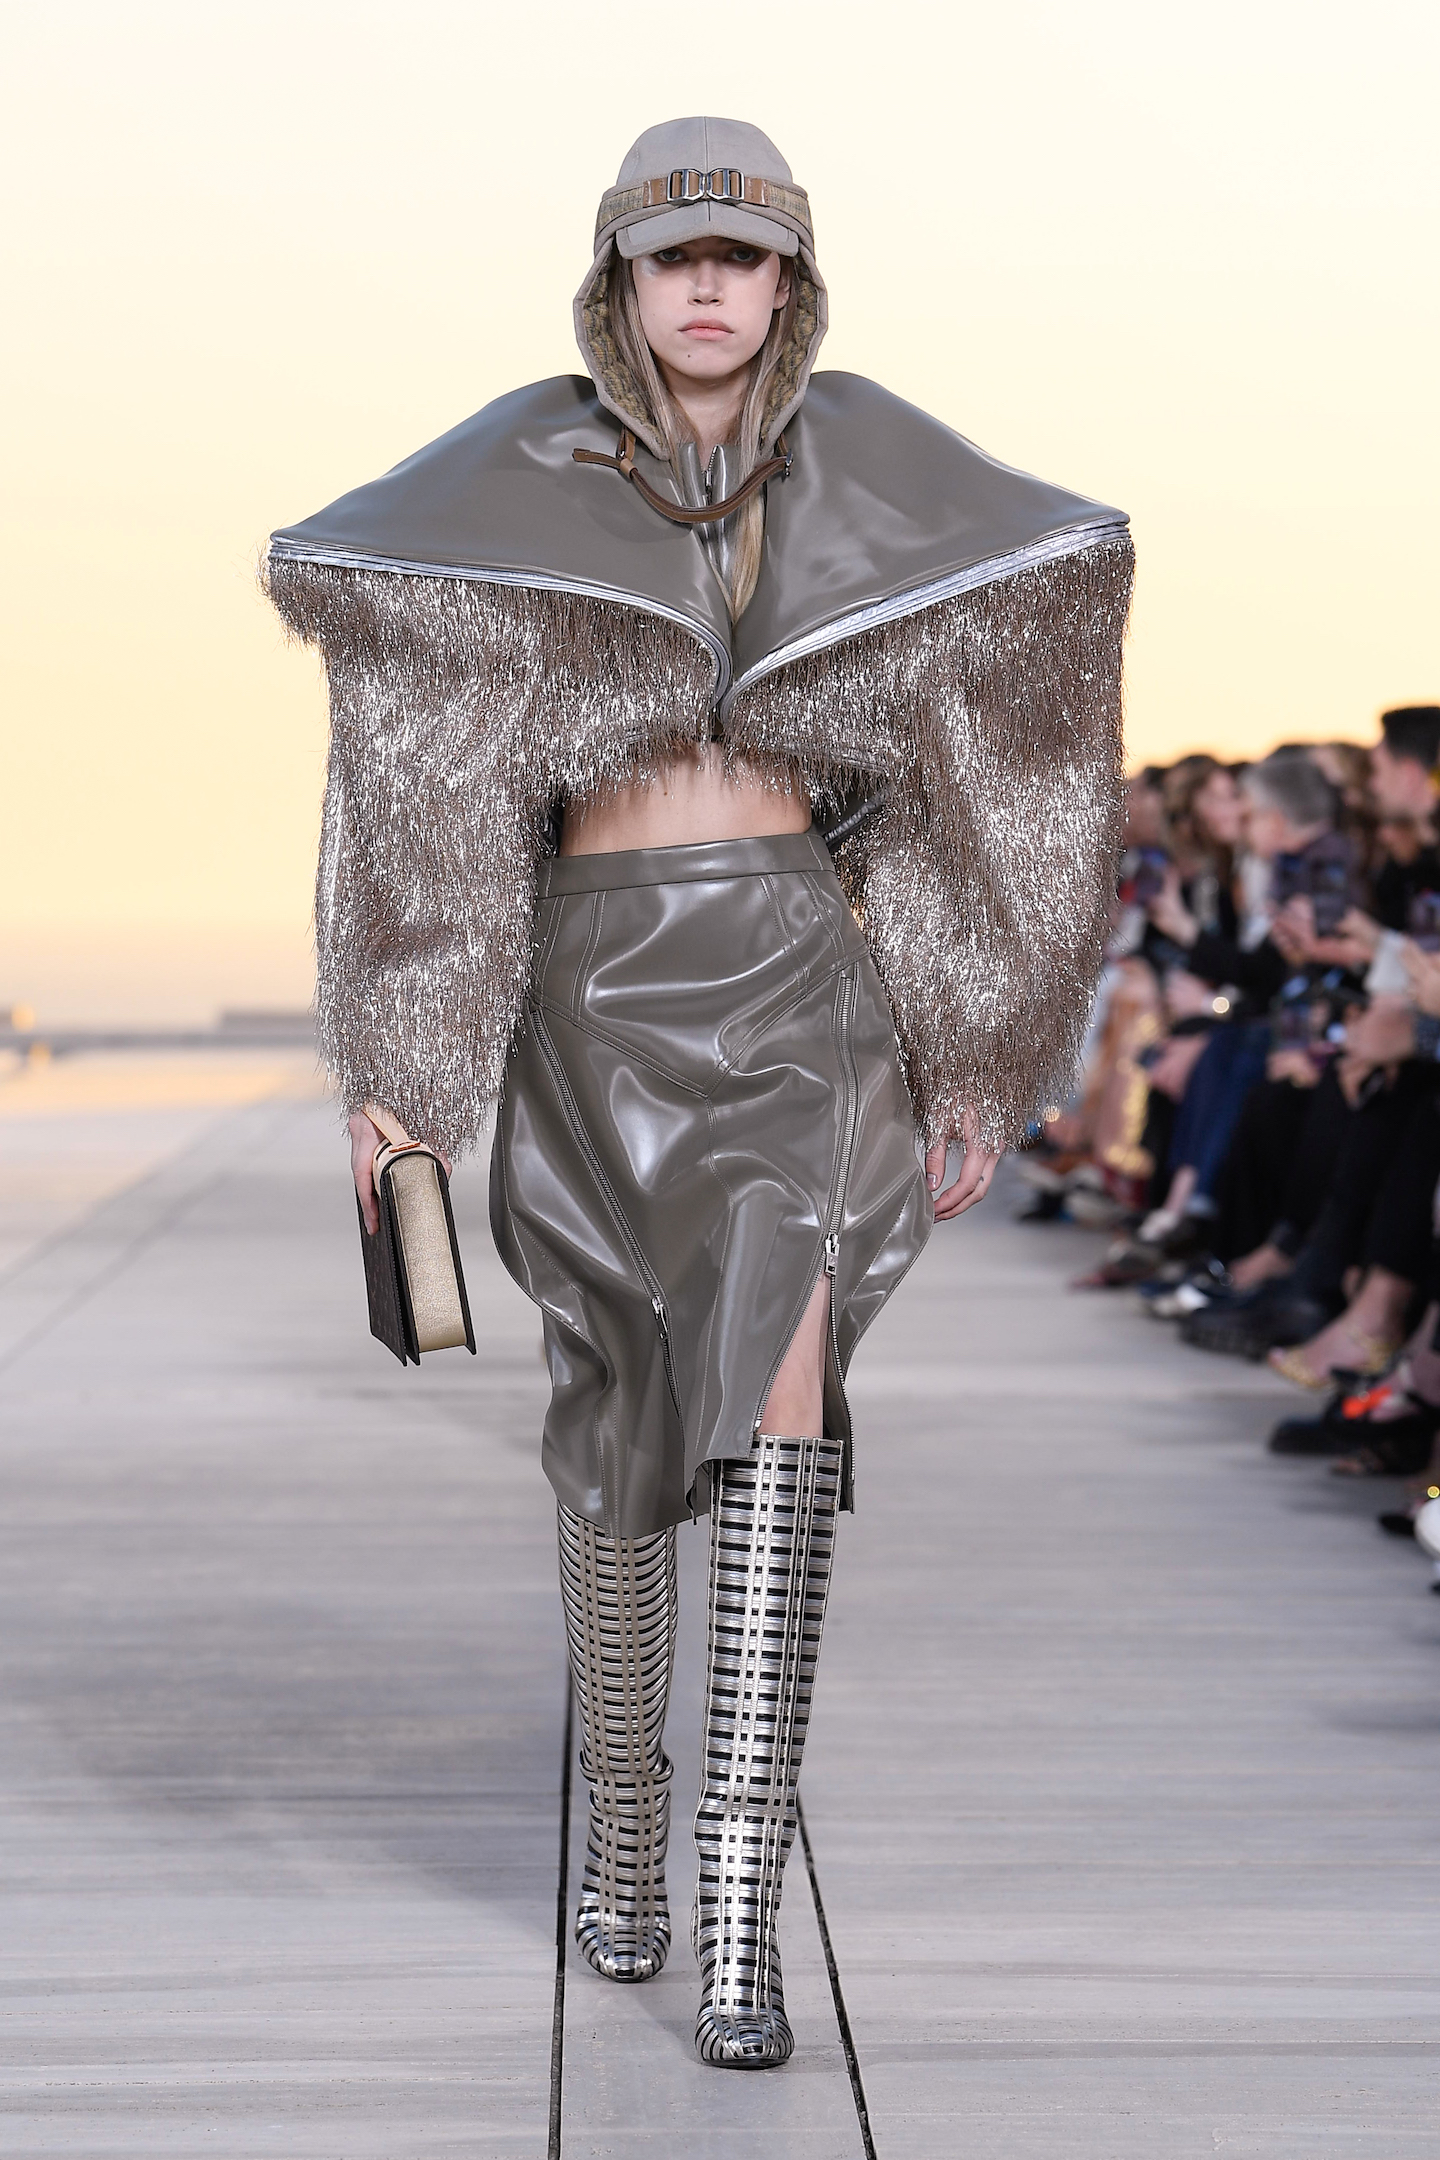 Louis Vuitton Cruise 2020: How Fashion Futurism Would Have Been Visualized  in Earlier Days